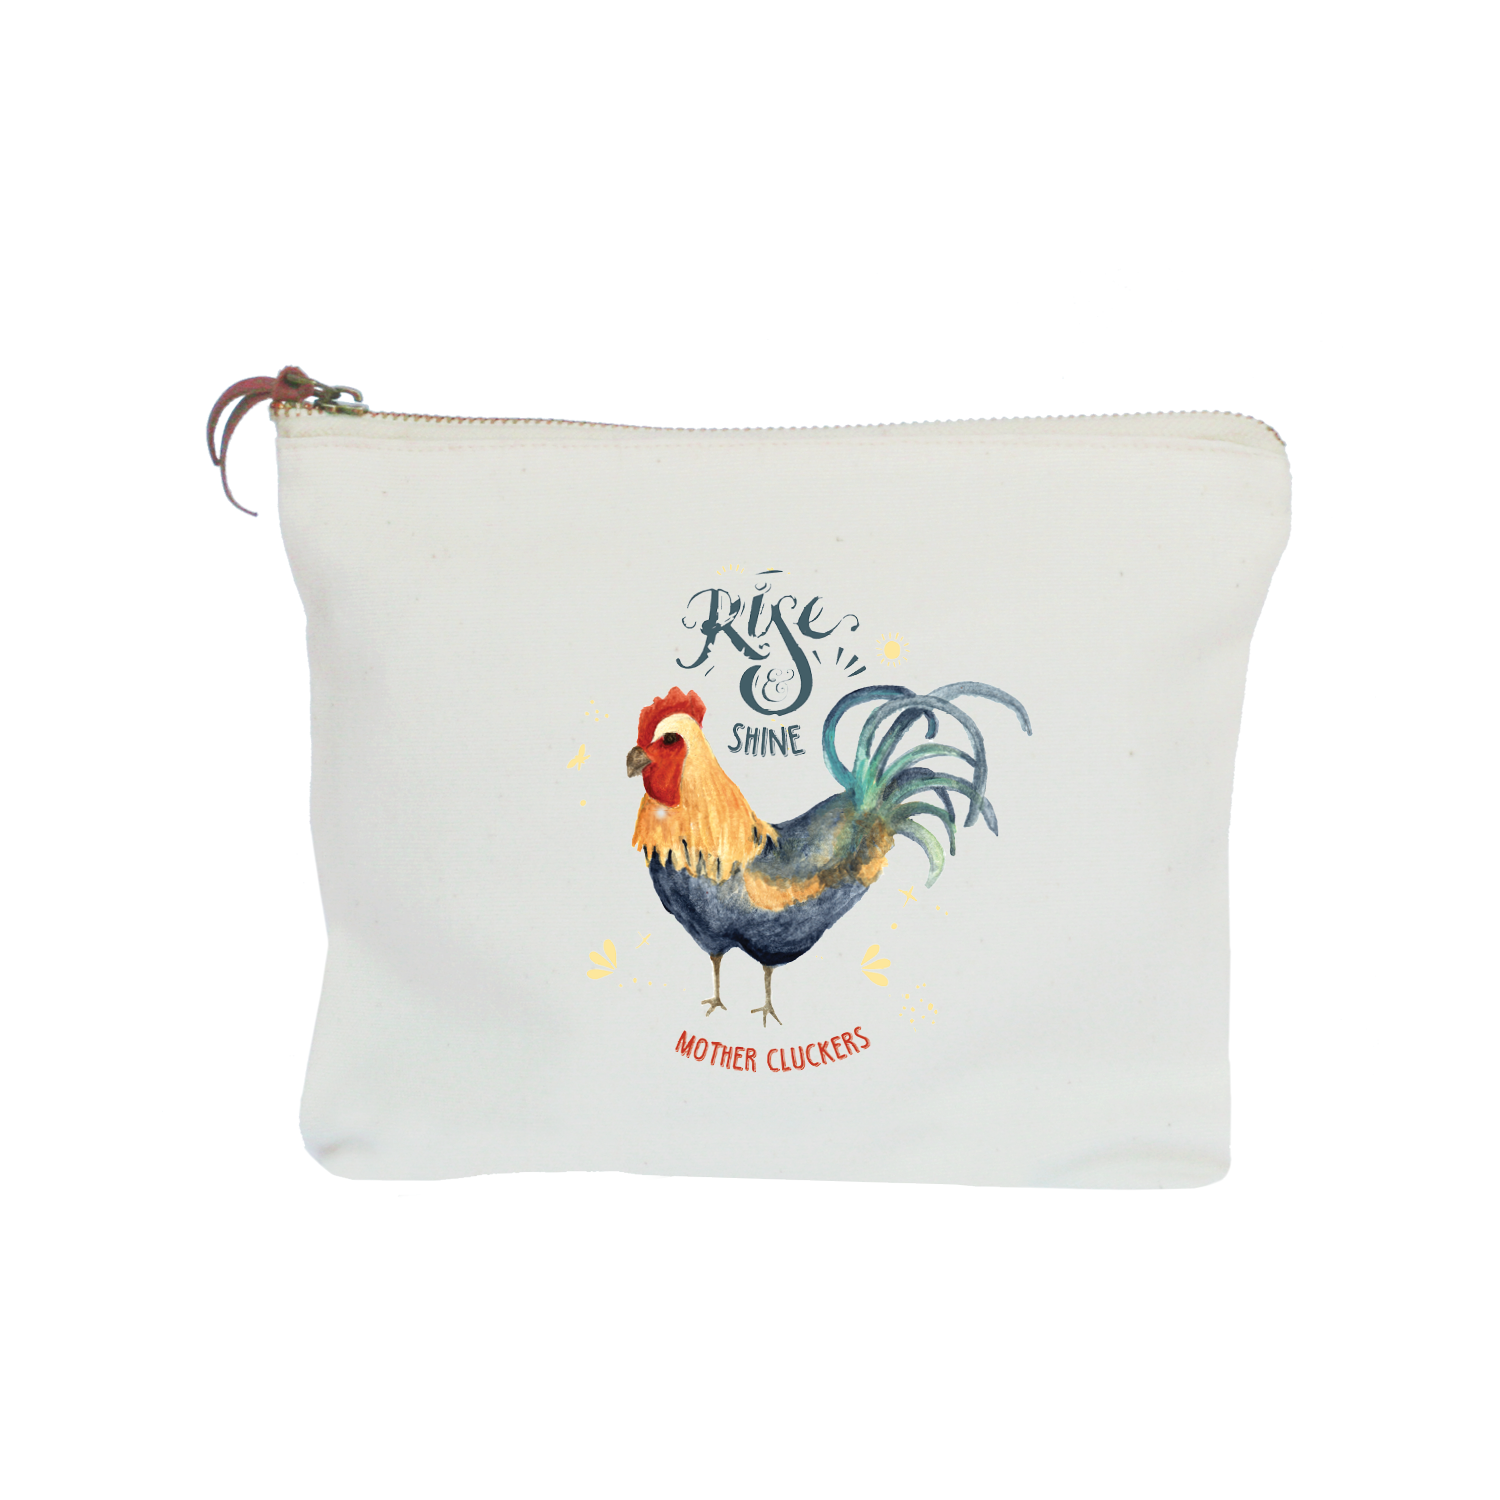 rise and shine mother cluckers zipper pouch